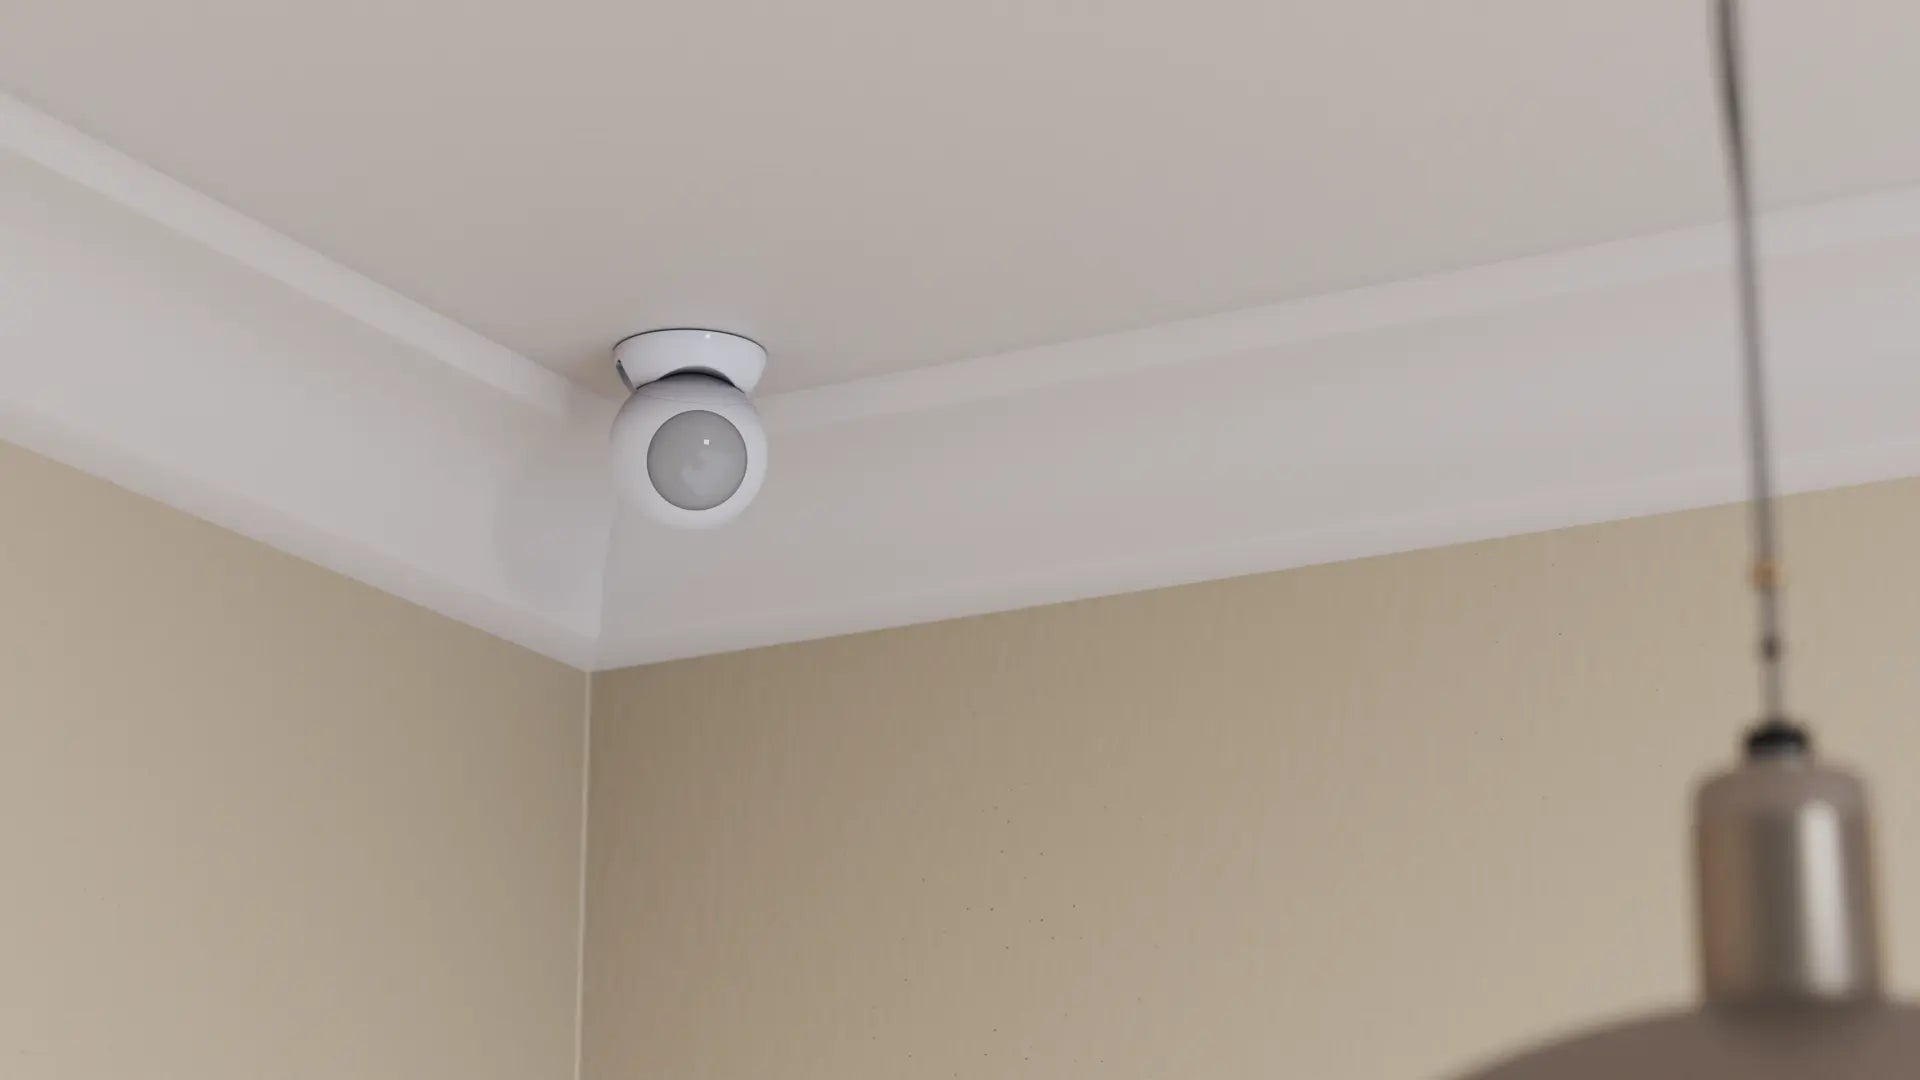 Abode Multi Sensor mounted on the ceiling